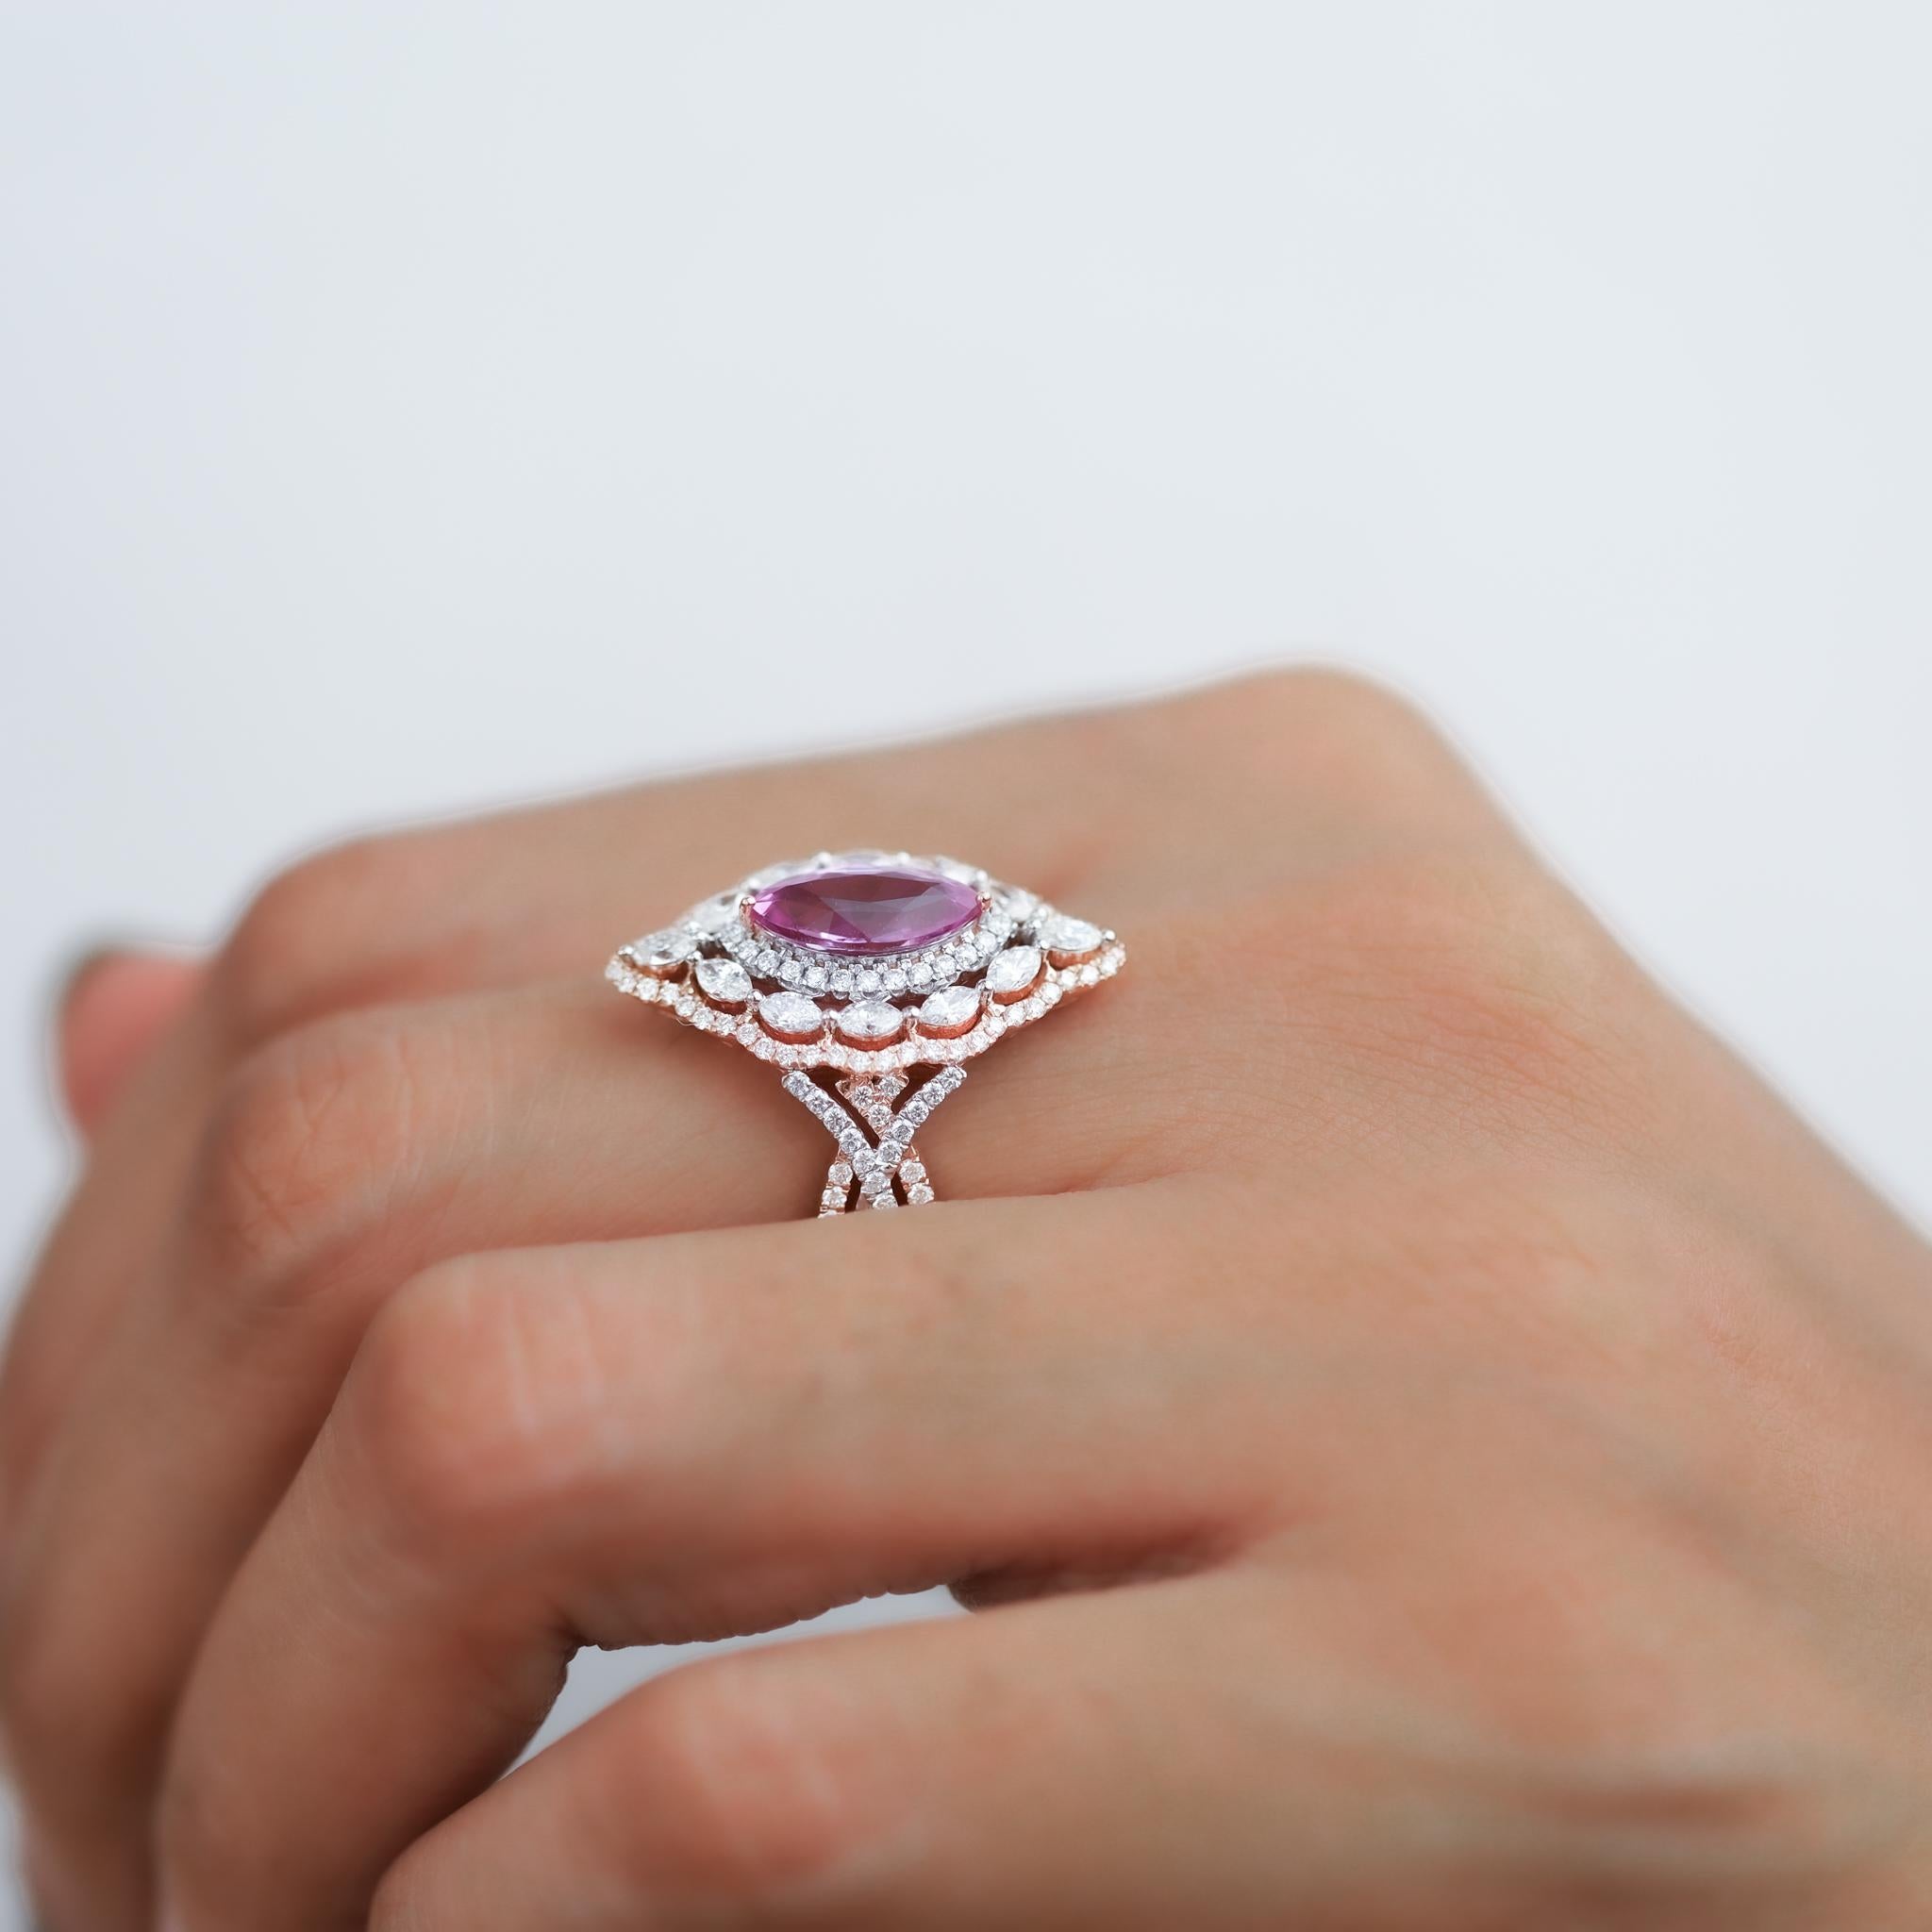 Art Deco 1.5 Carat Pink Sapphire Diamond Cocktail Engagement Ring in 18k Yellow Gold For Sale